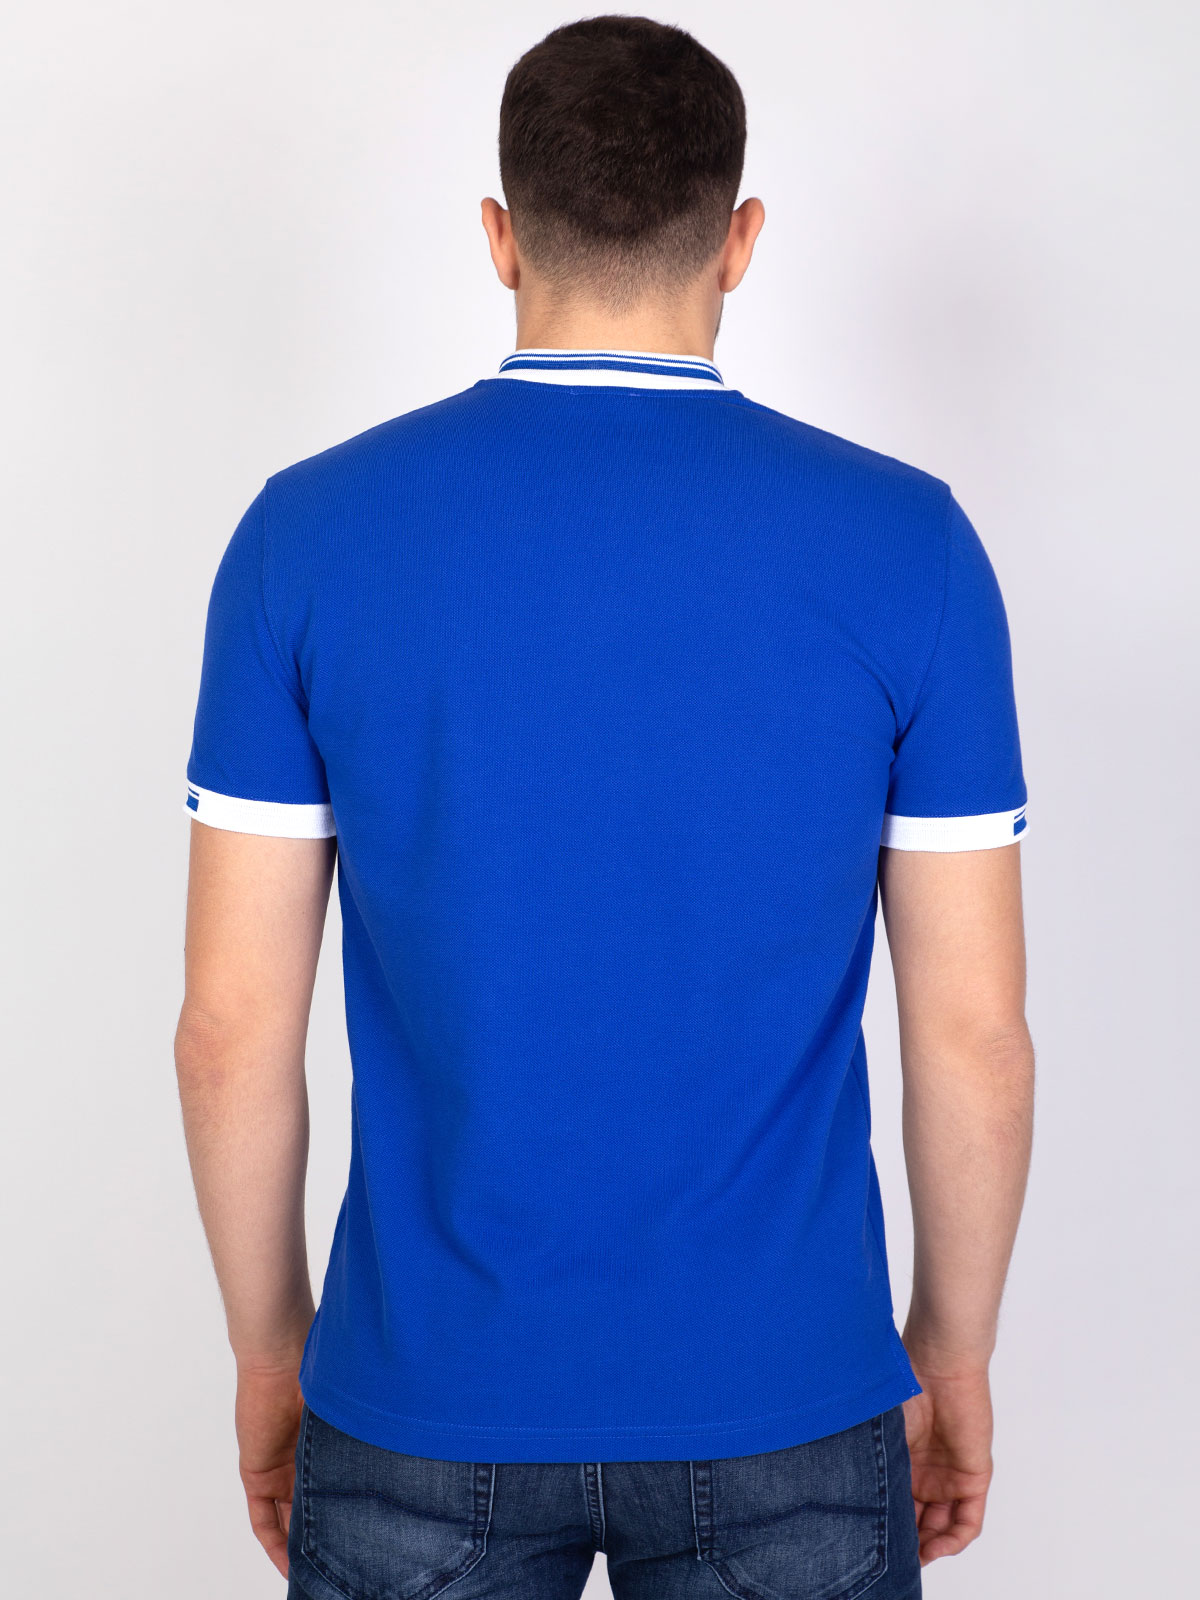 Blouse in royal blue with collar in whi - 93398 € 20.25 img4